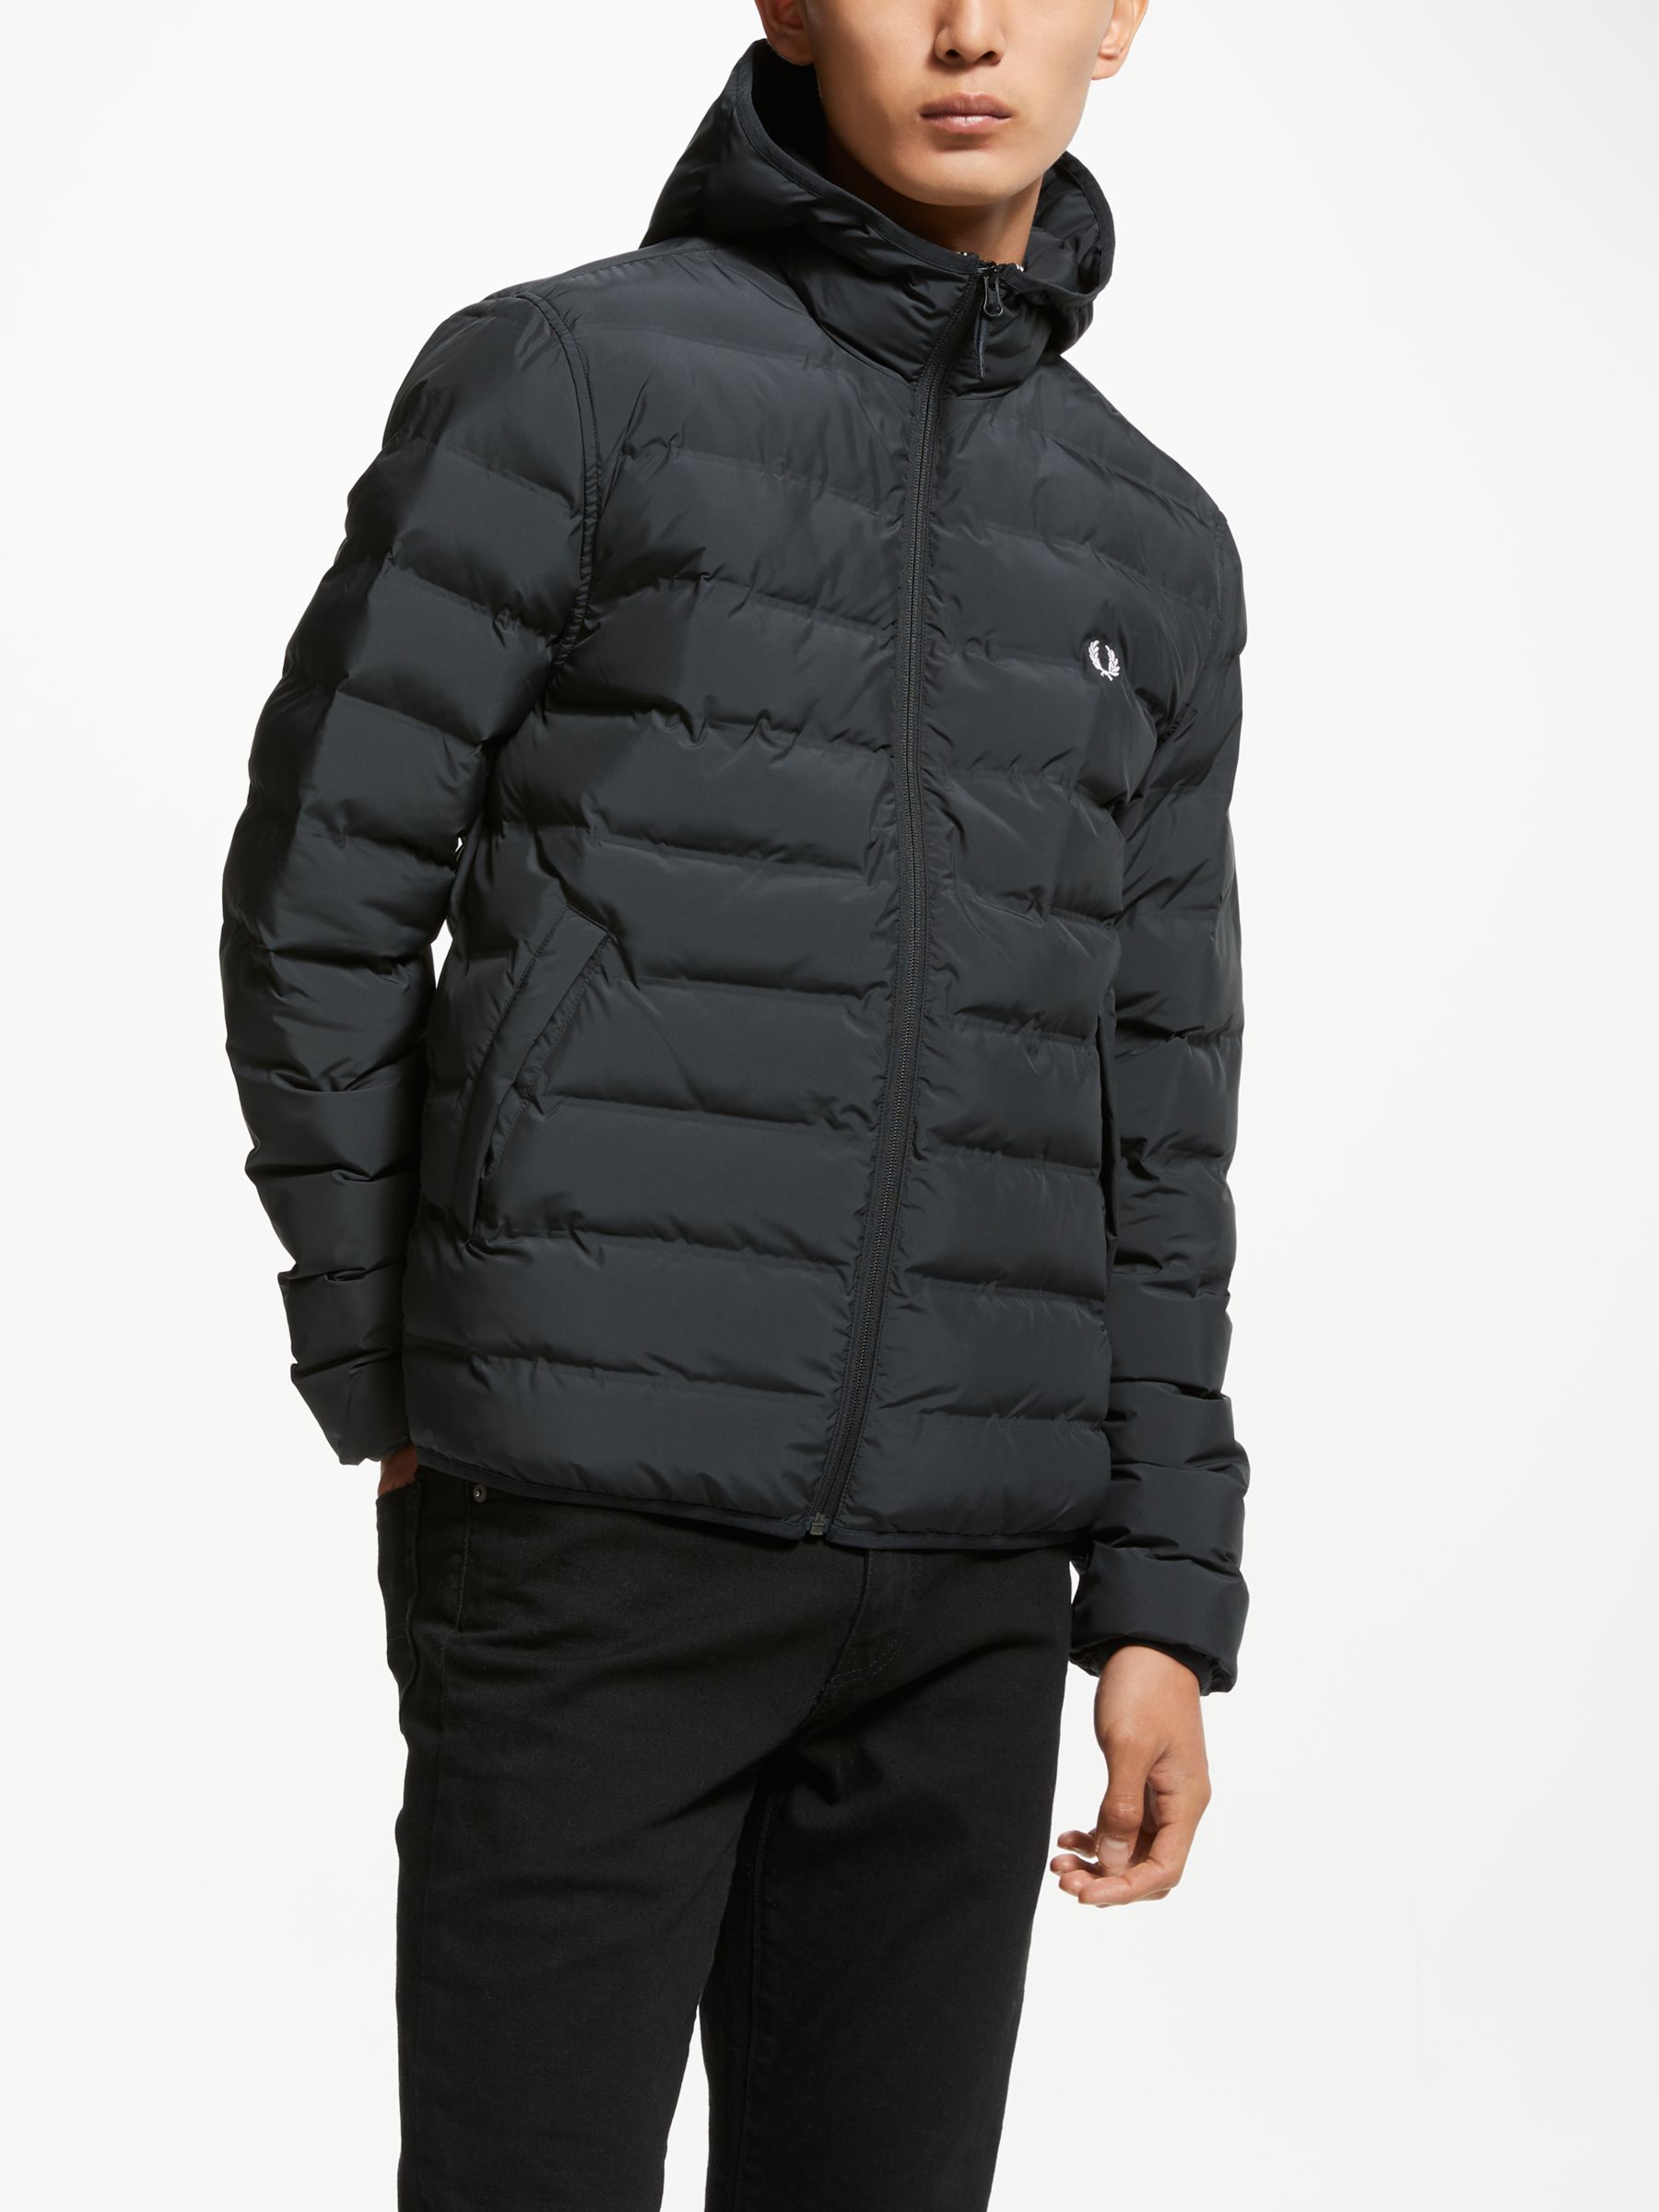 Fred Perry Brentham Hooded Puffer Jacket, Black at John Lewis & Partners